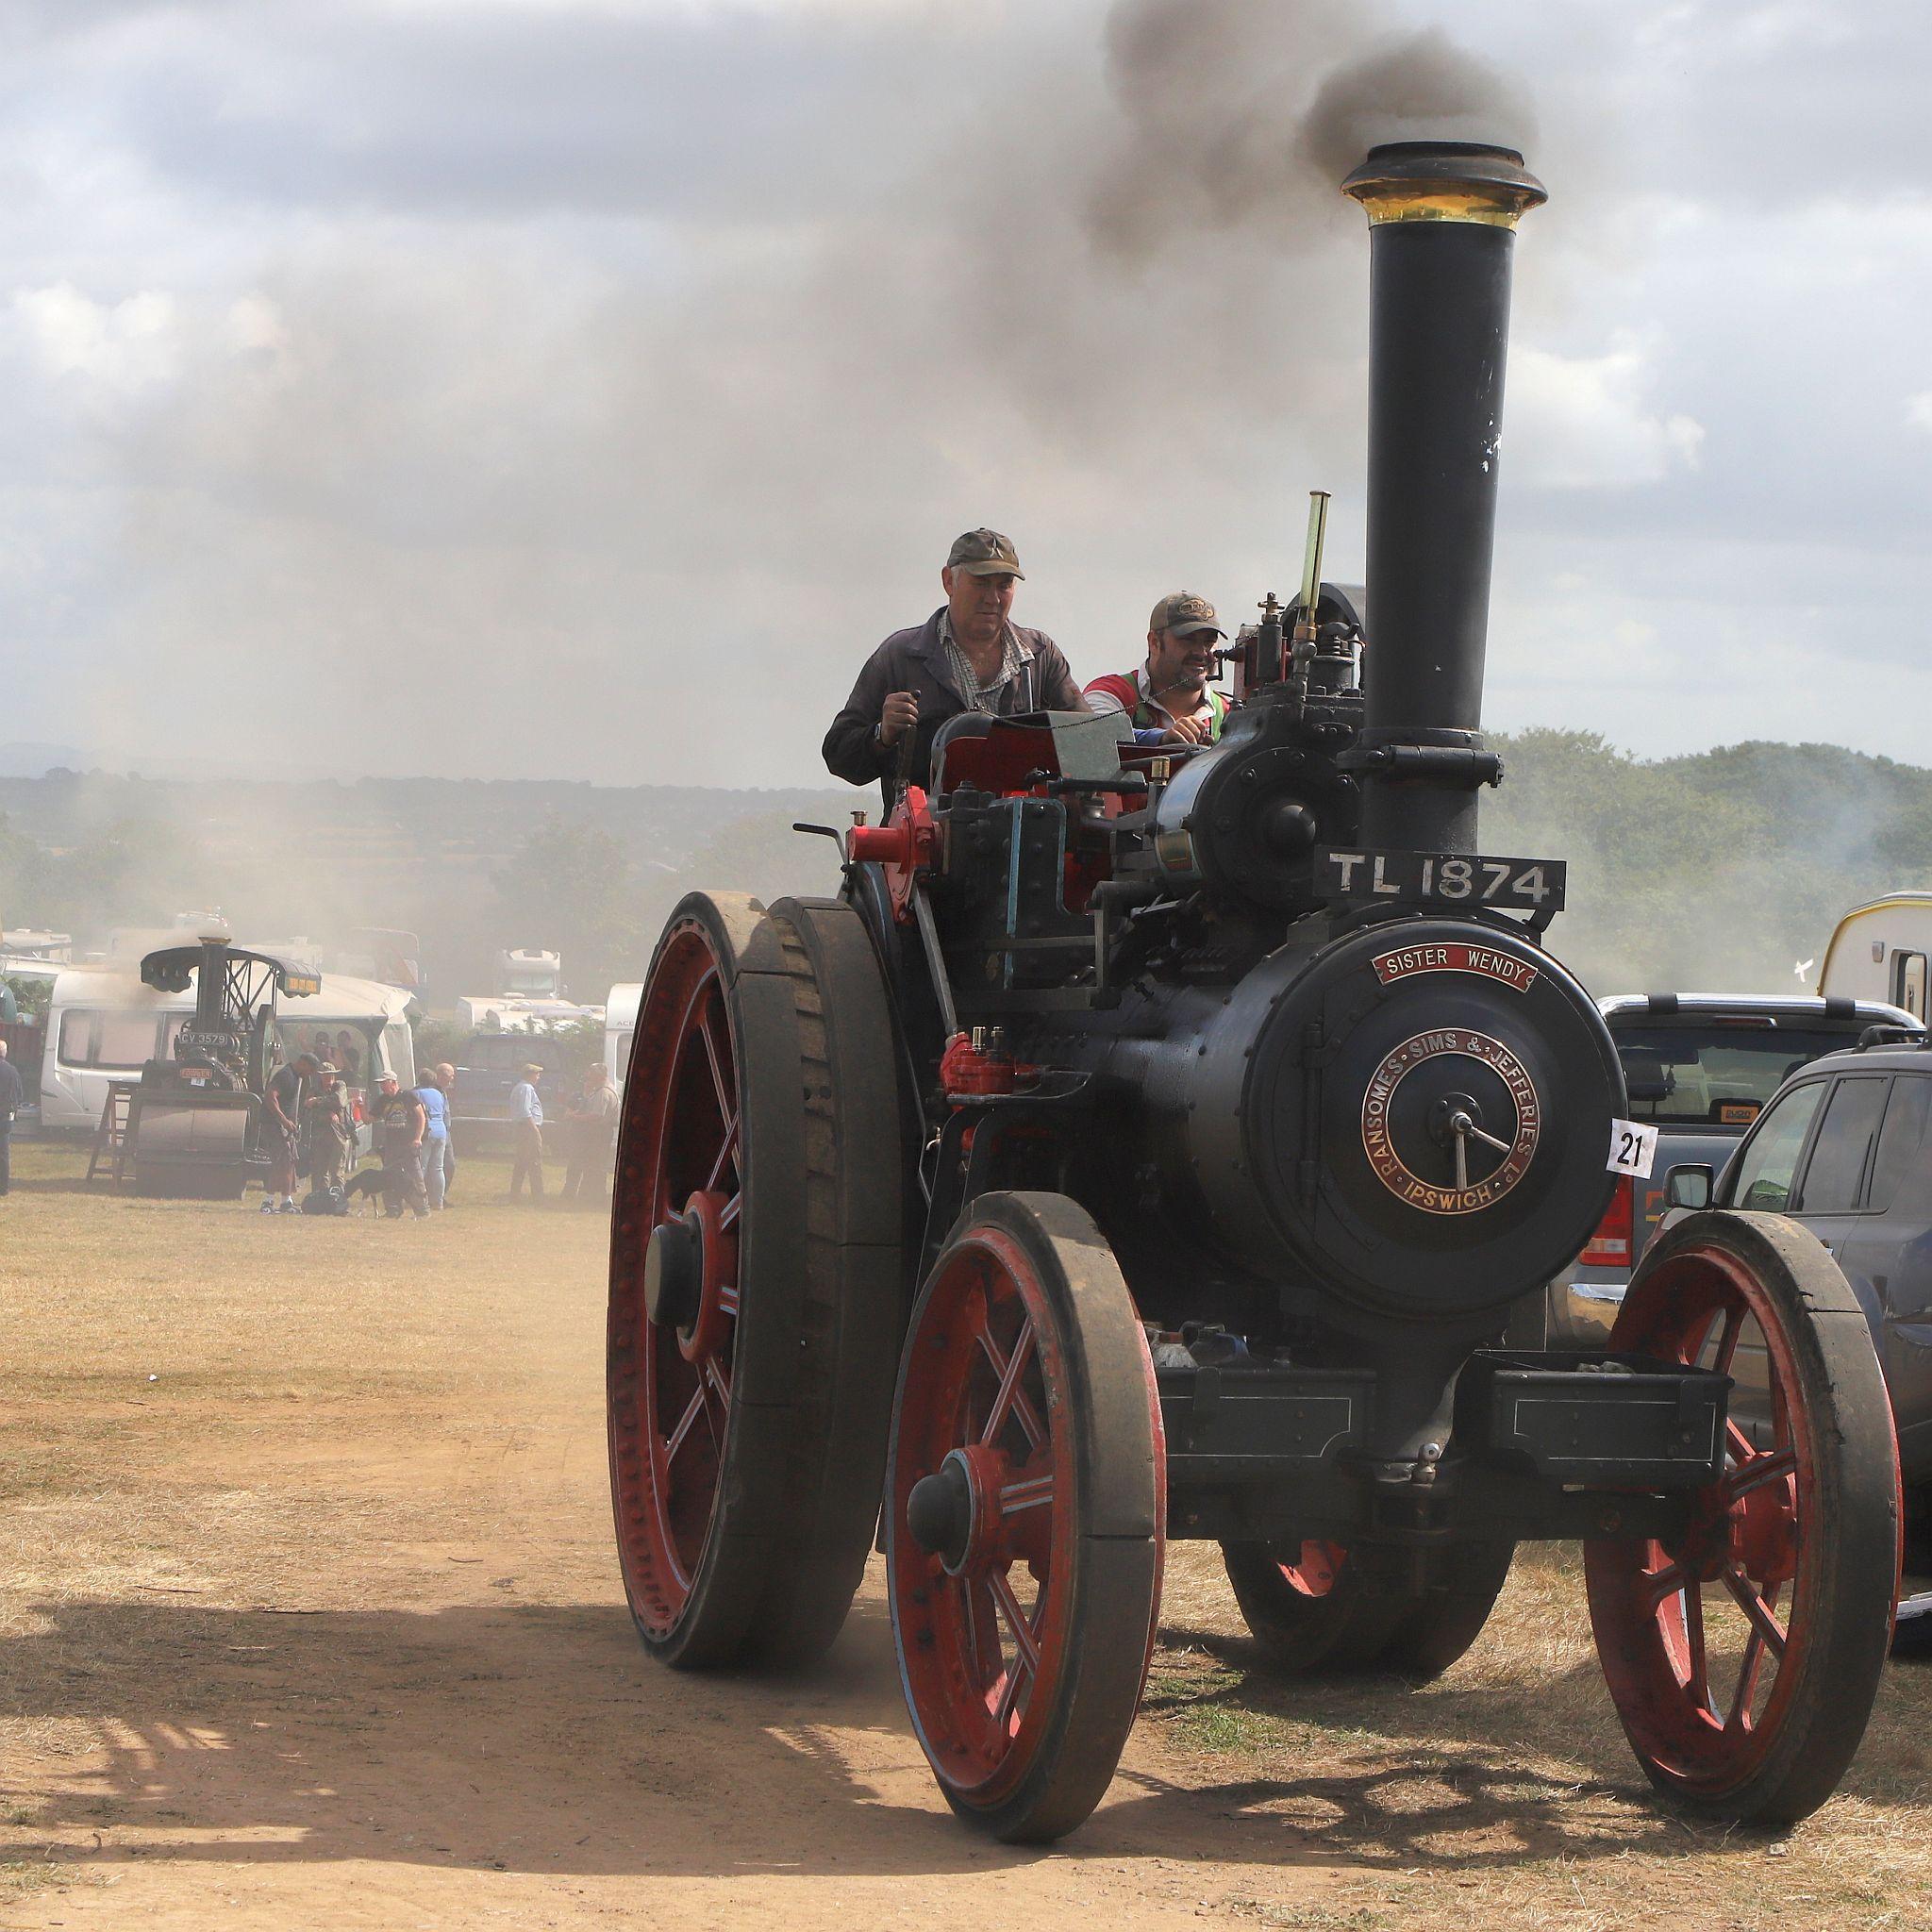 Sister Wendy TL1874. Steam traction engine at a vintage rally in Cornwall. 20-Aug-2022. West of England Steam Engine Society - WESES, Stithians Showground in Truro, Cornwall